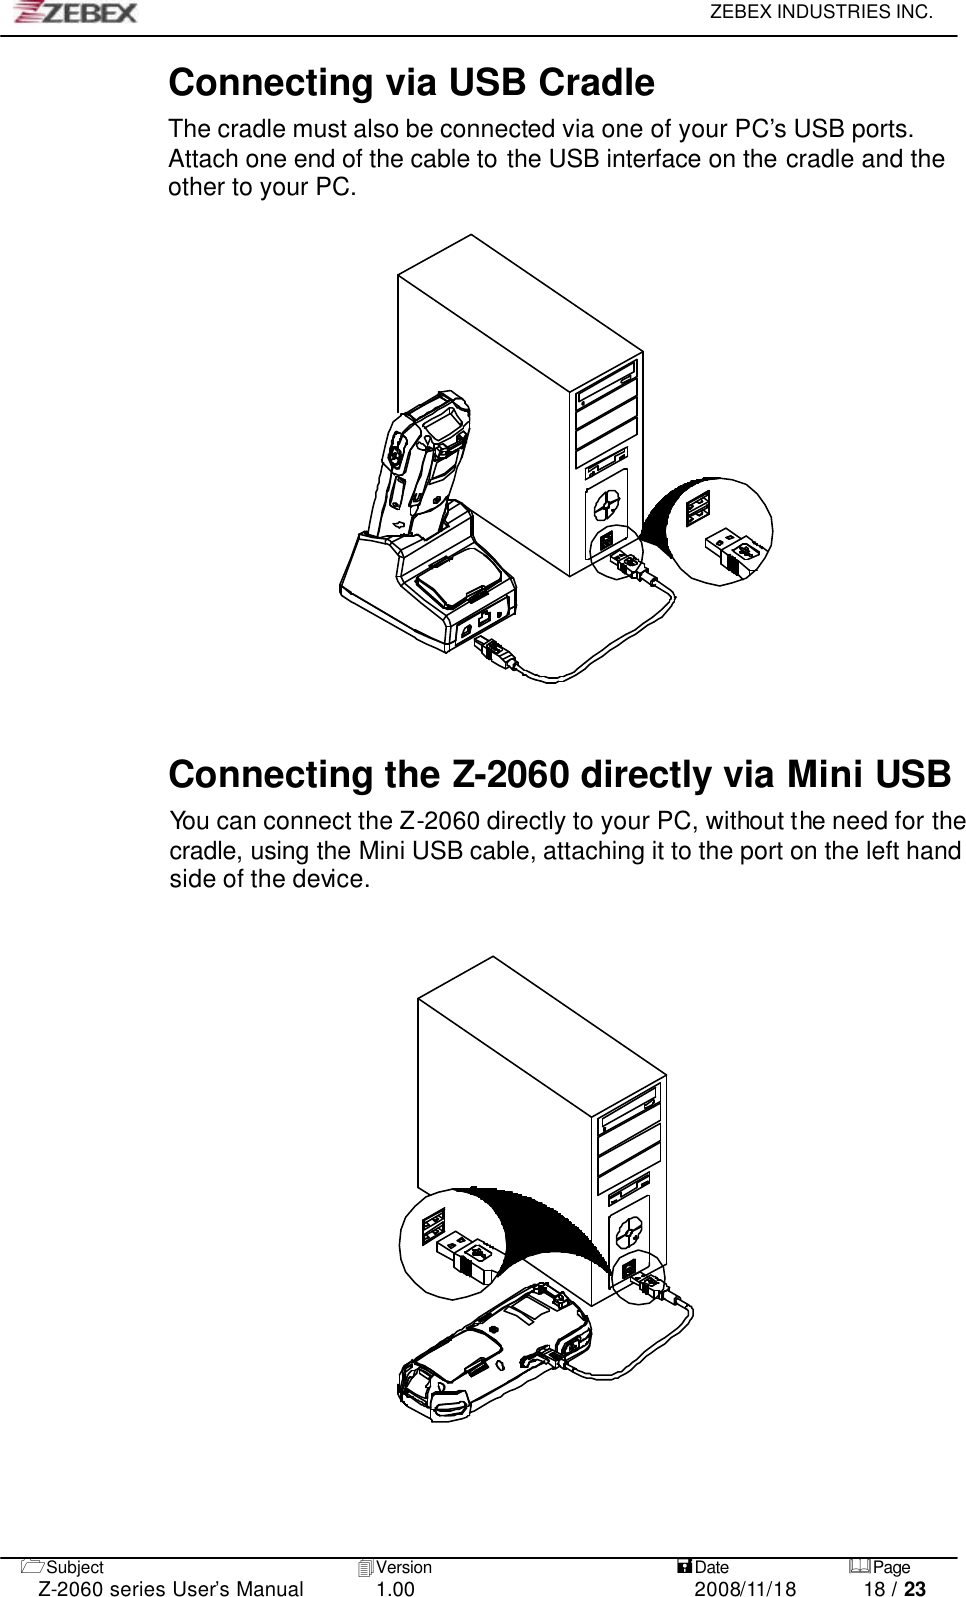     ZEBEX INDUSTRIES INC.   1Subject 4Version   =Date &amp;Page  Z-2060 series User’s Manual 1.00 2008/11/18 18 / 23 Connecting via USB Cradle The cradle must also be connected via one of your PC’s USB ports. Attach one end of the cable to the USB interface on the cradle and the other to your PC.              Connecting the Z-2060 directly via Mini USB You can connect the Z-2060 directly to your PC, without the need for the cradle, using the Mini USB cable, attaching it to the port on the left hand side of the device.                                 